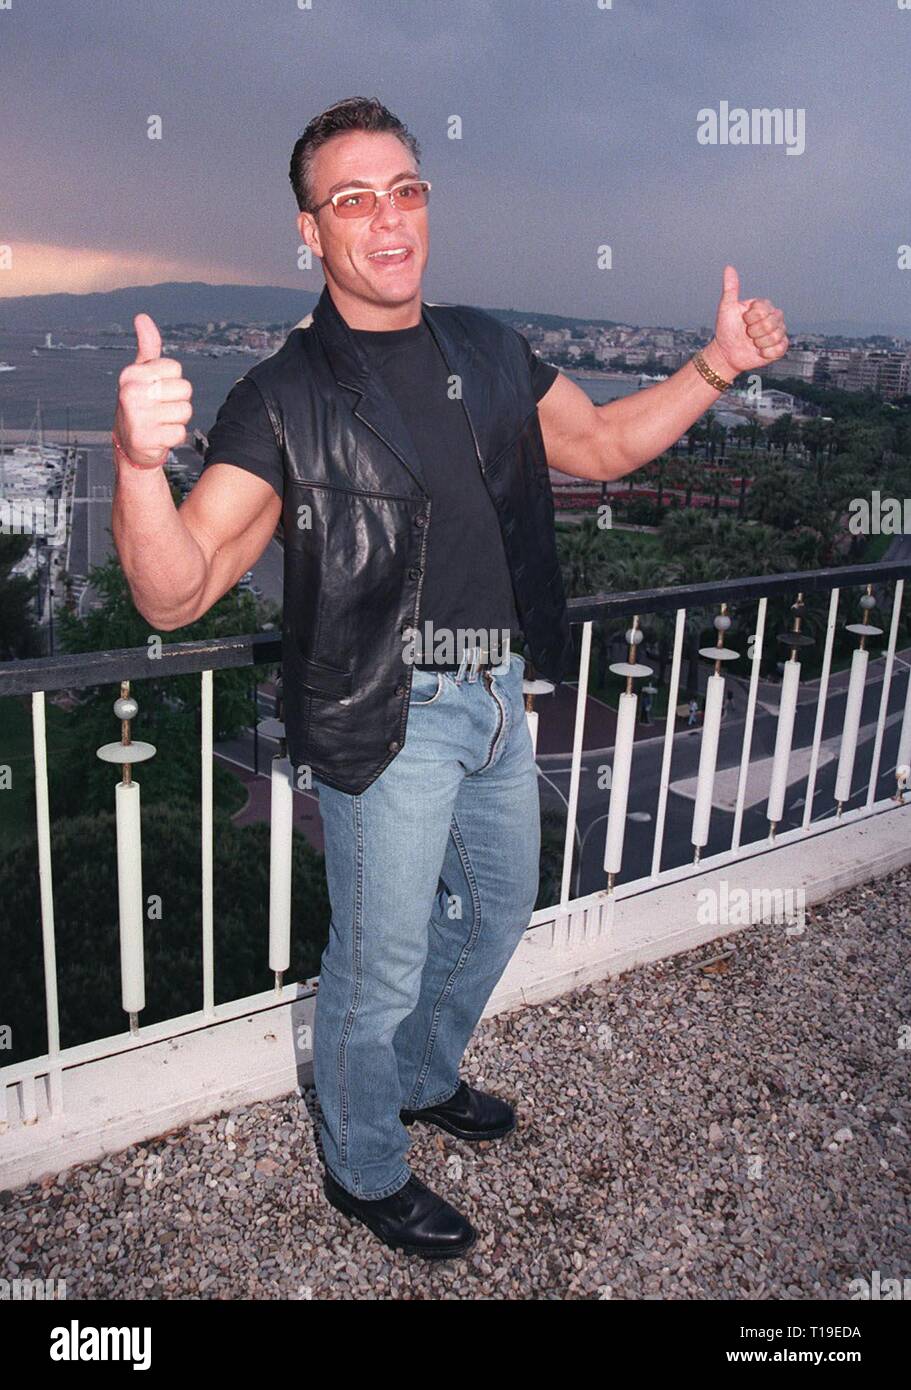 CANNES, FRANCE - May 19, 1998: Actor JEAN-CLAUDE VAN DAMME at the Cannes  Film Festival Stock Photo - Alamy